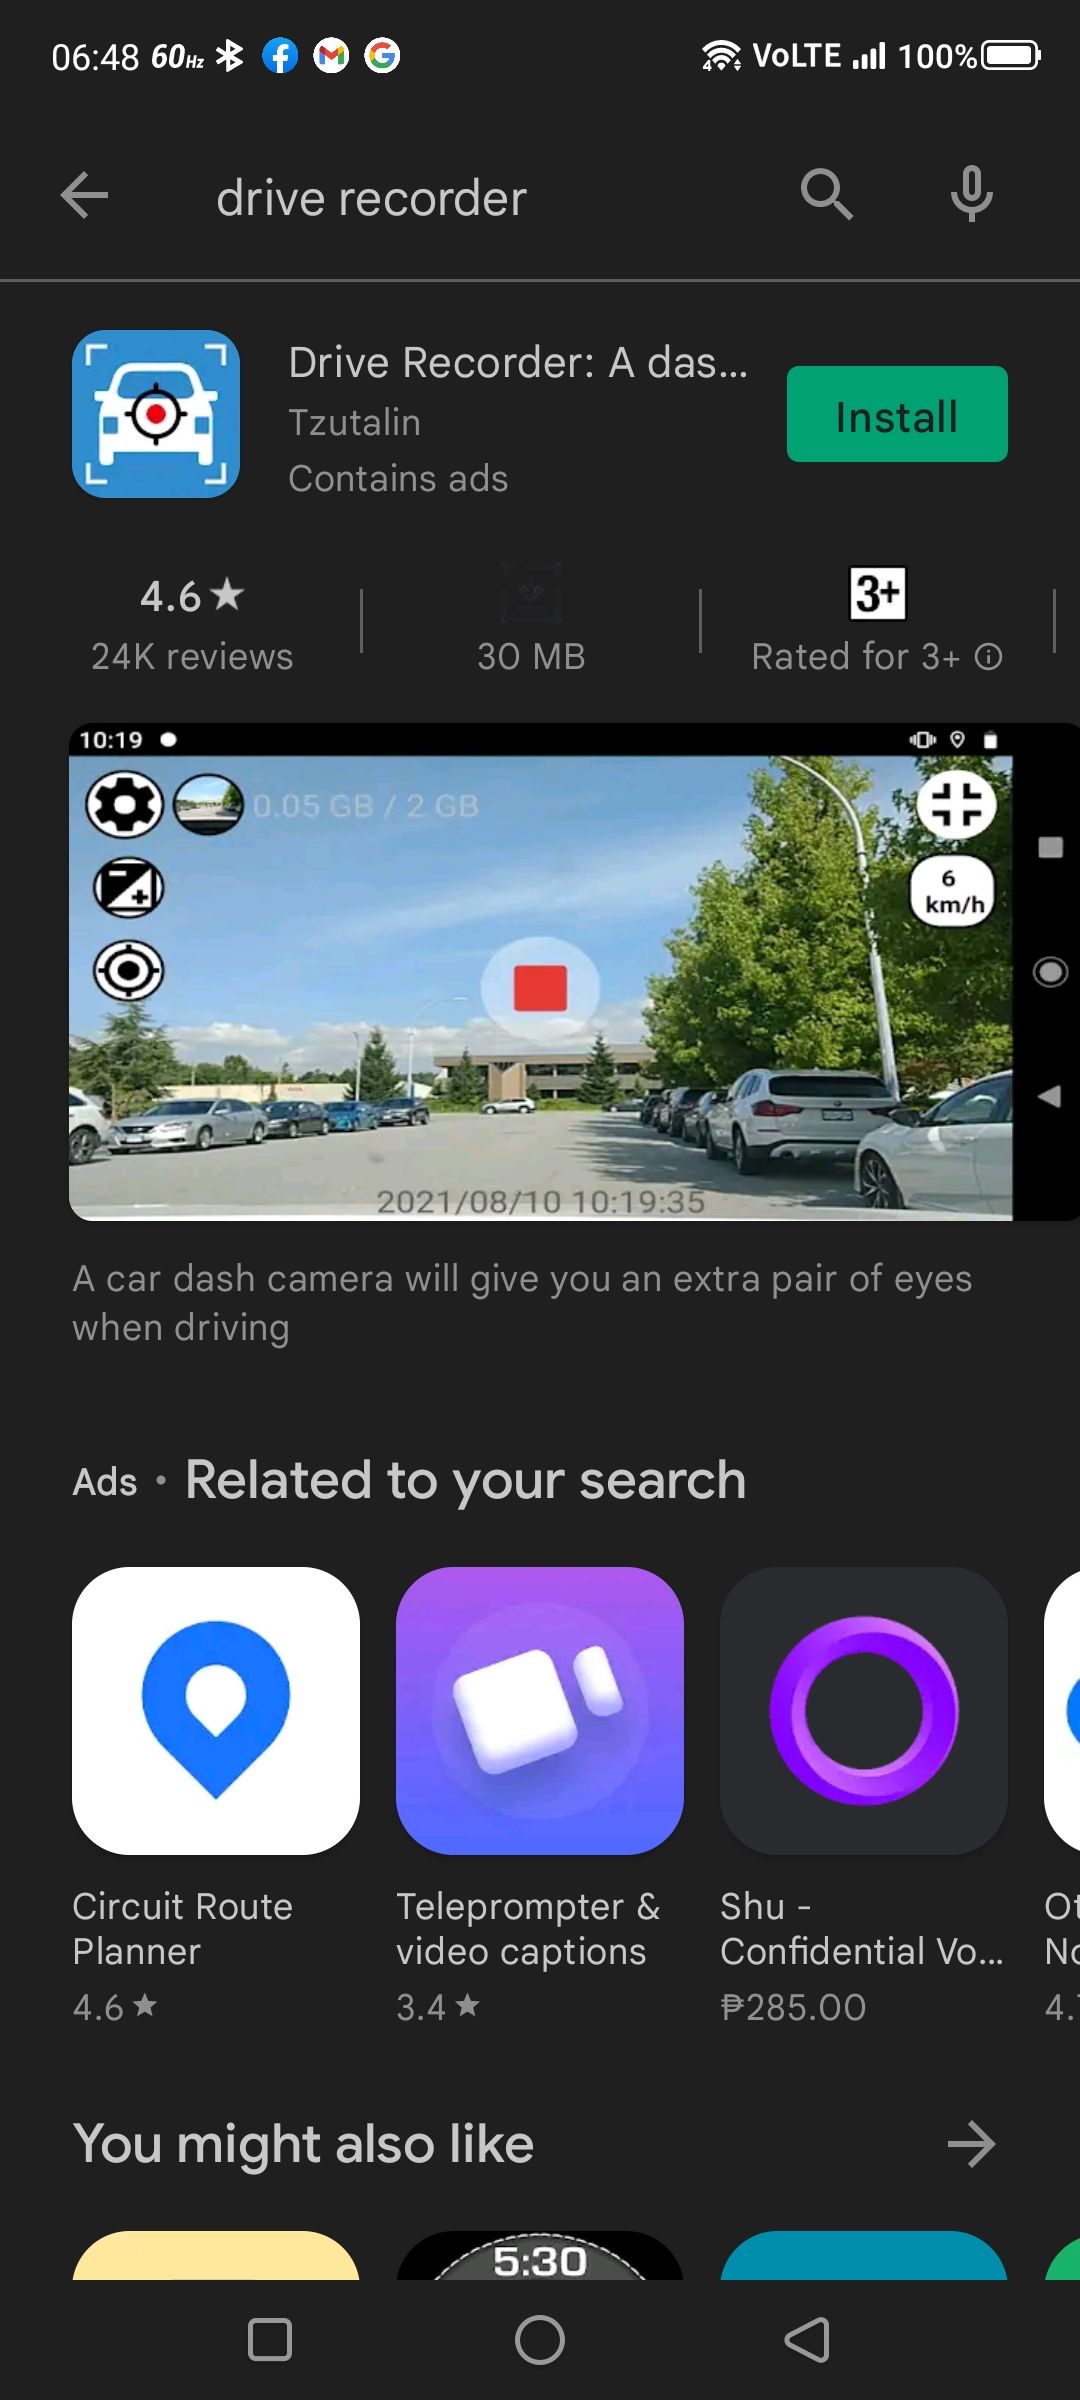 Drive Recorder dashcam app on Play Store